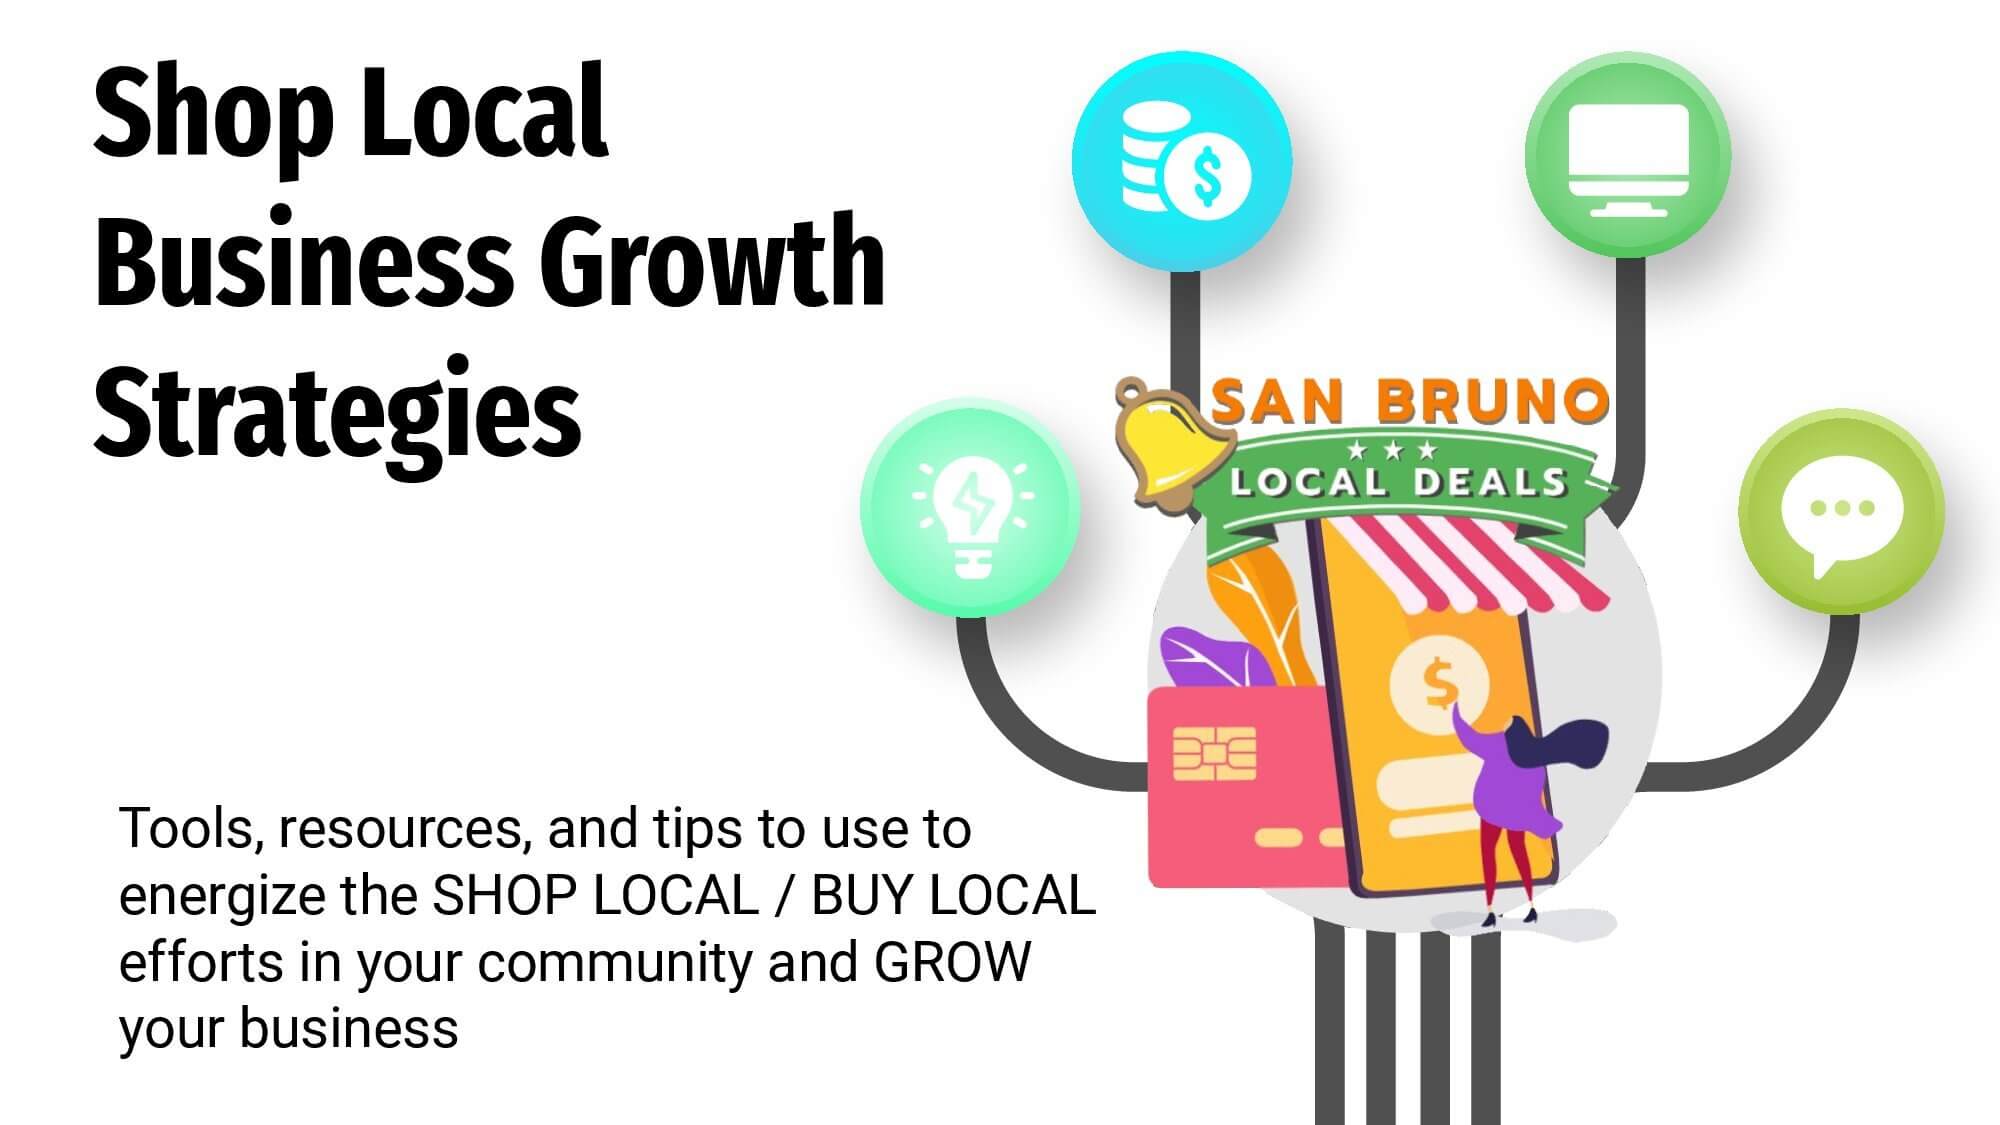 NEW (SBLD) of Shop Local Business Growth Strategies + Co-Op v5_00001